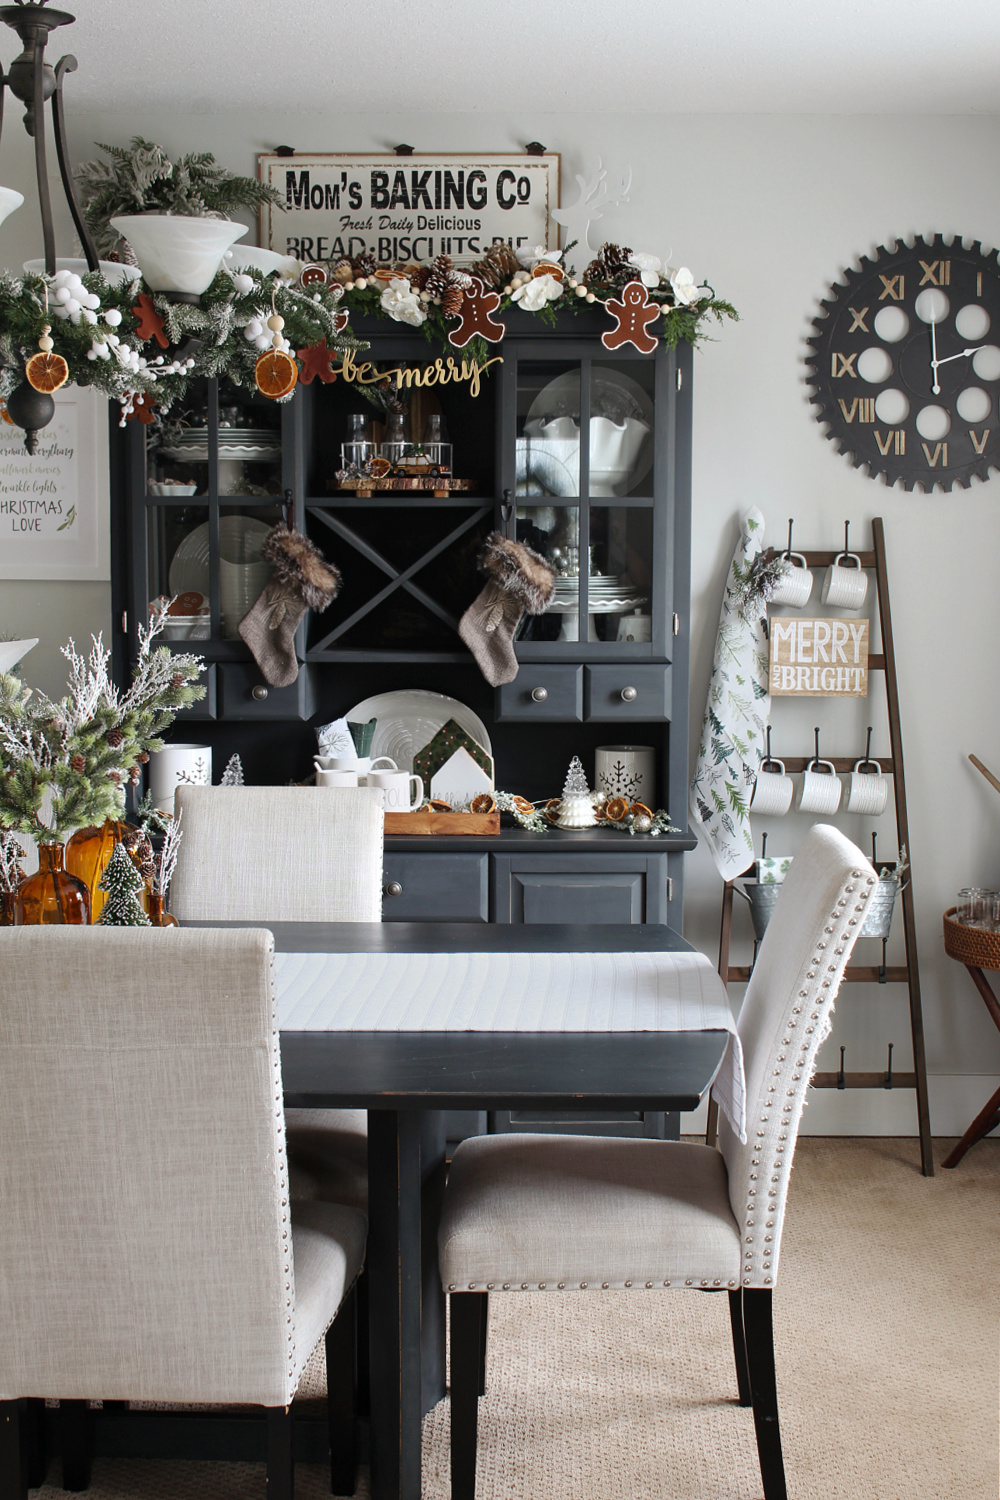 Dining room with black painted table, buffet and hutch decorated for Christmas.